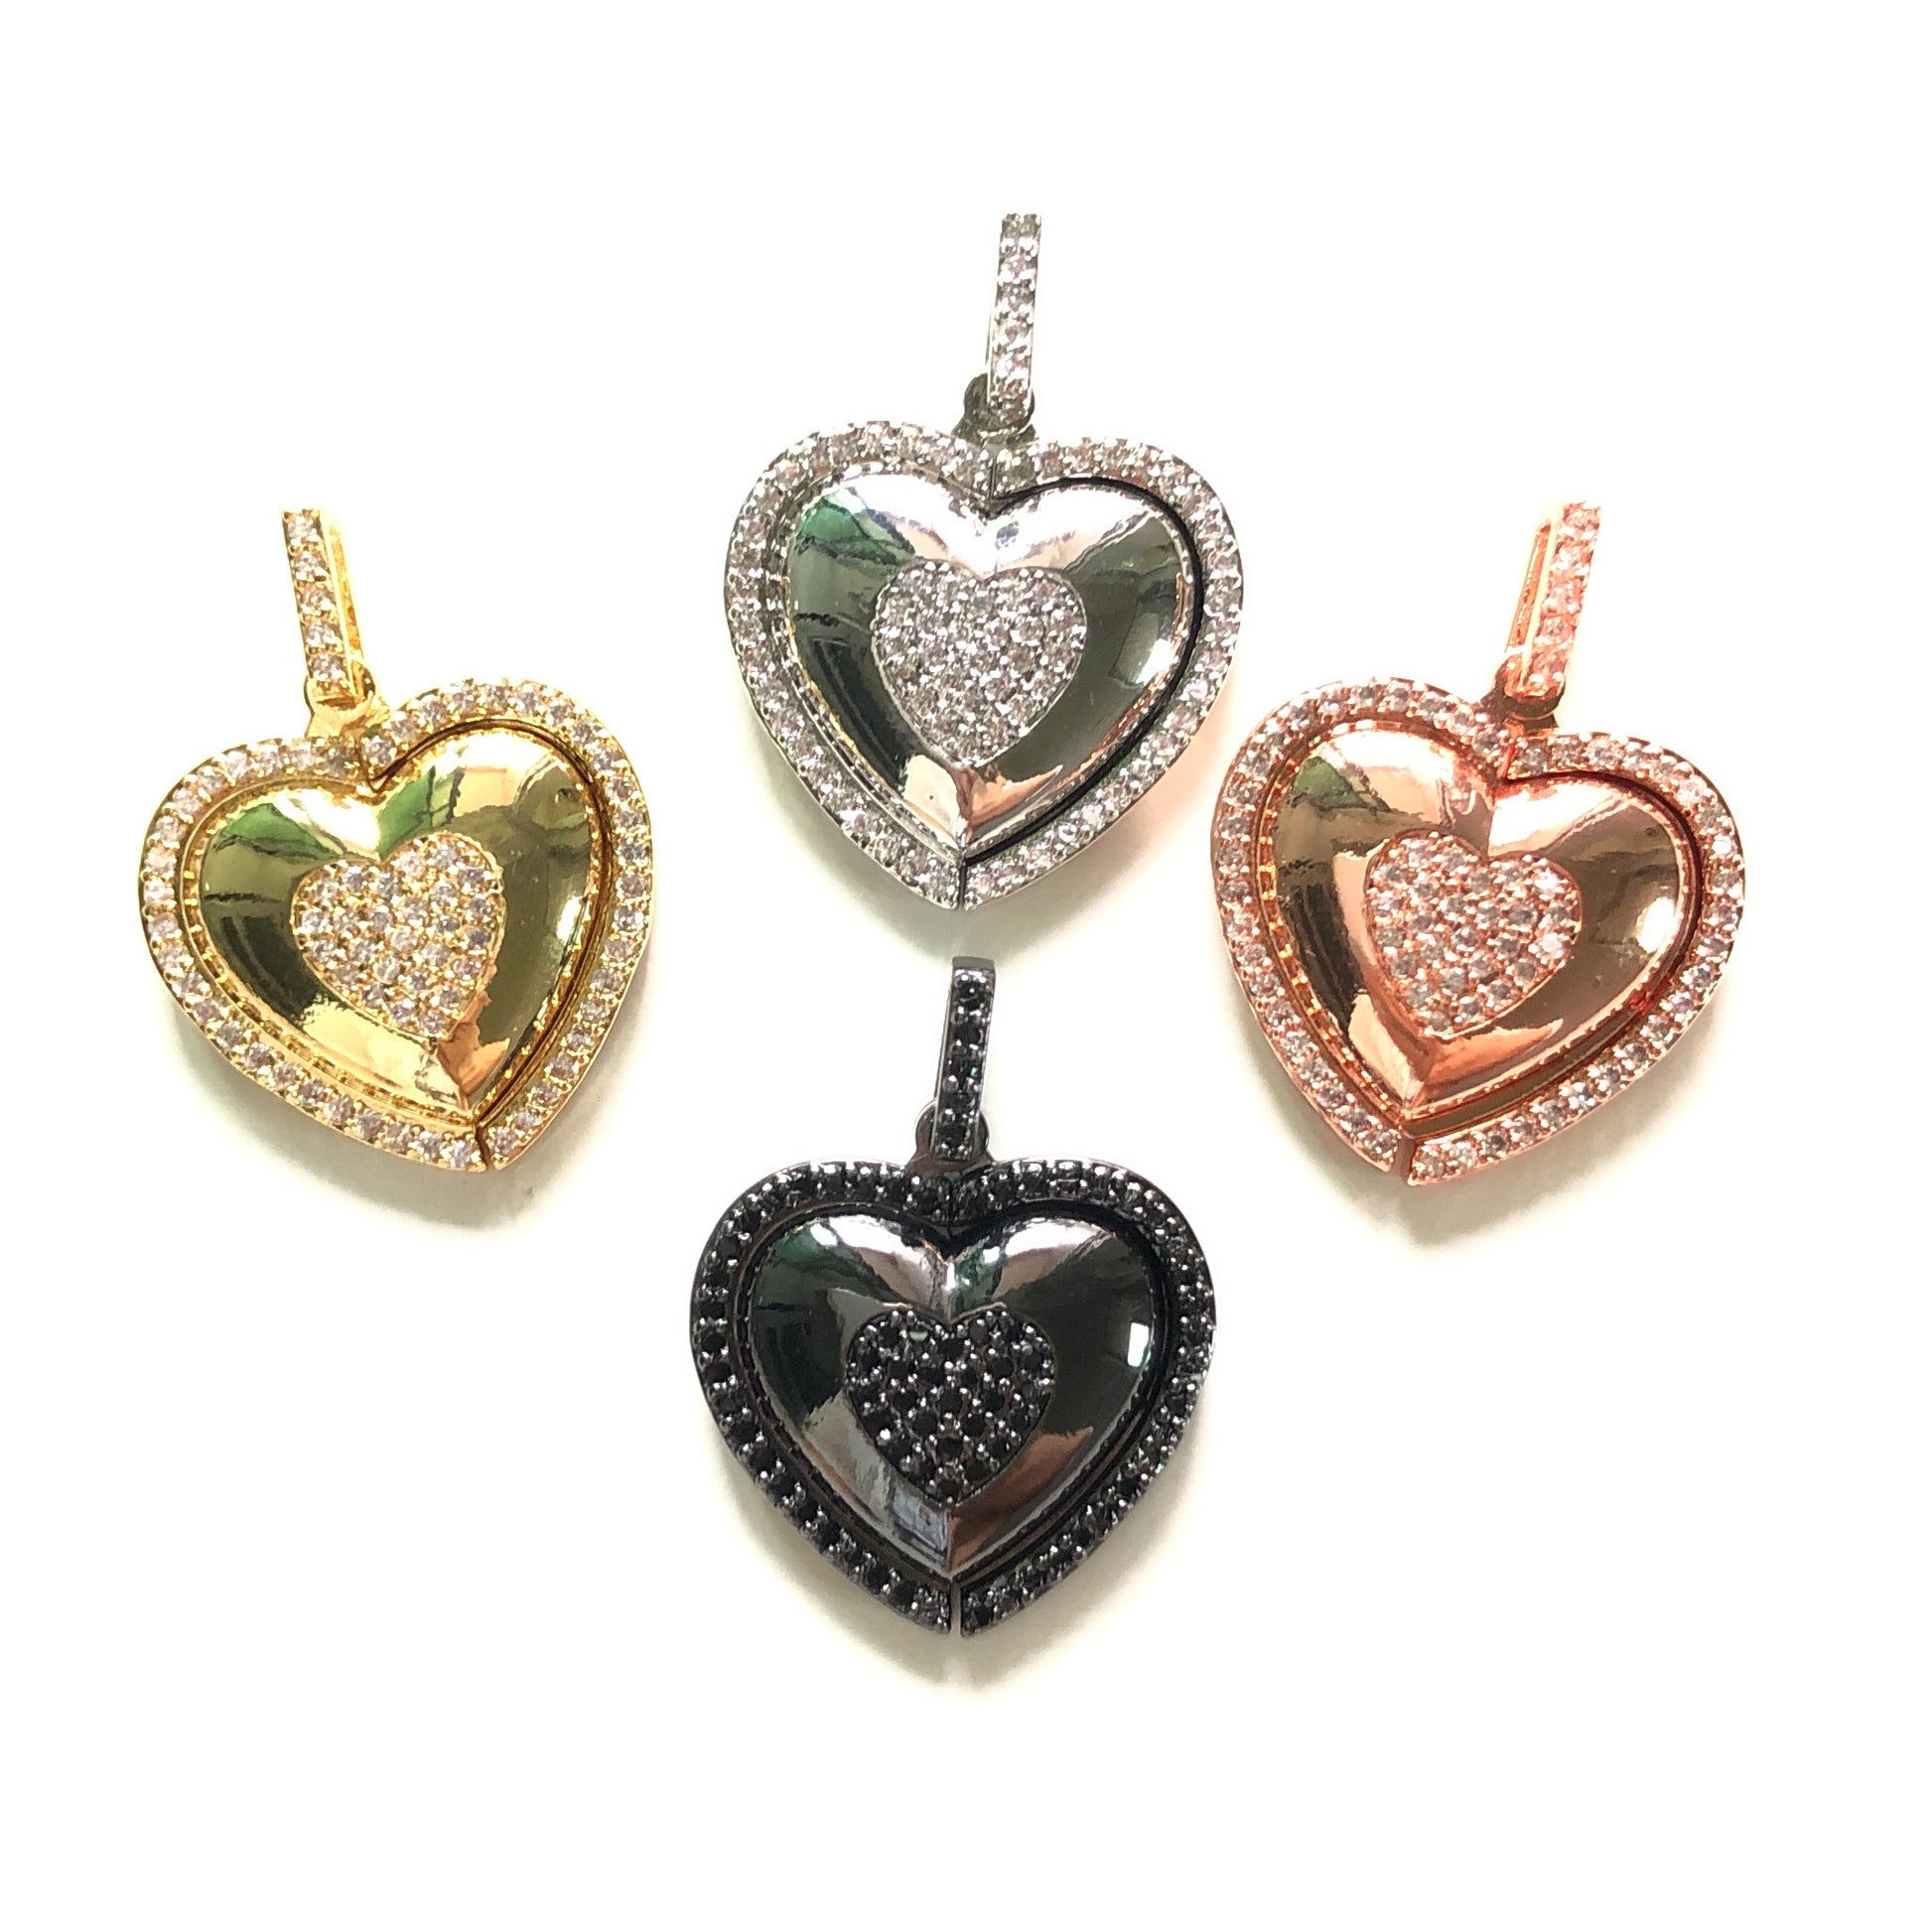 10pcs/lot 27*22mm CZ Paved Mom in Heart 3D Charms CZ Paved Charms Mother's Day On Sale Charms Beads Beyond